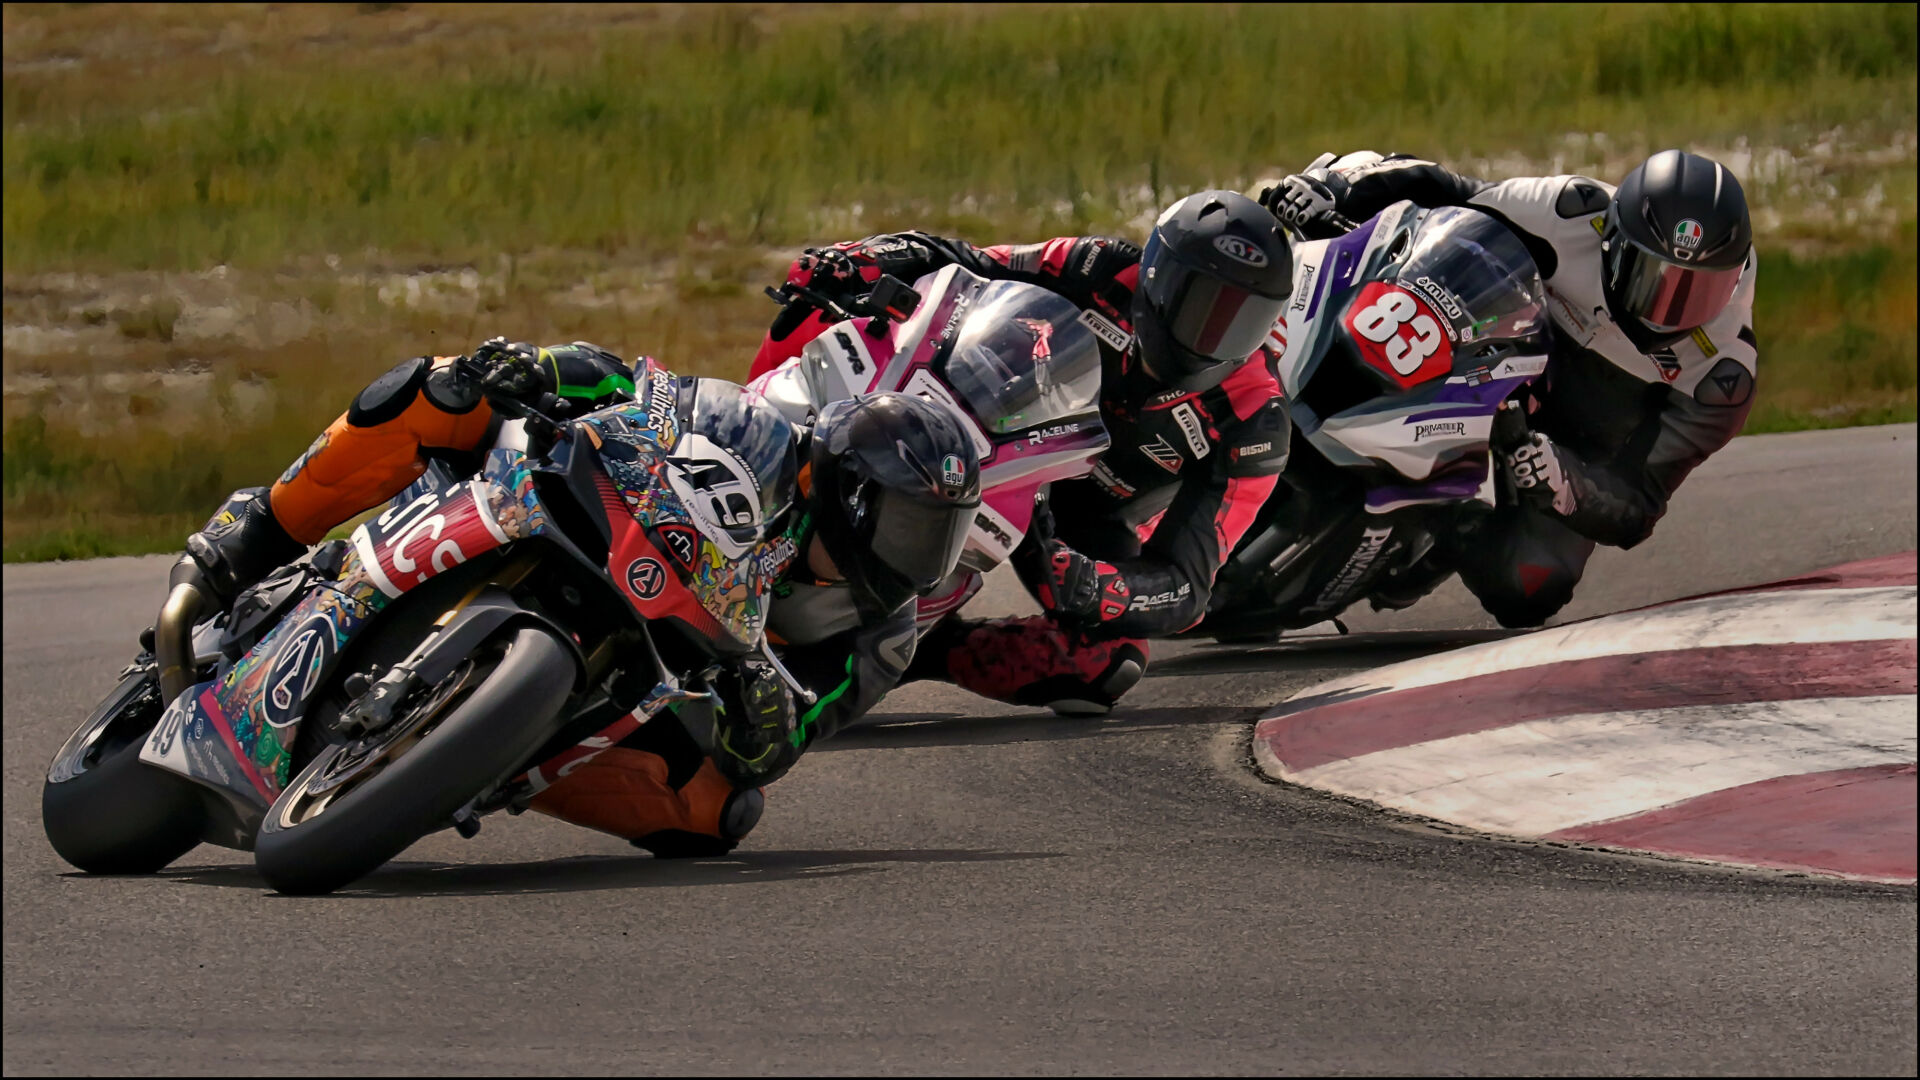 Brian Childree (49) leads the pack on his way to victory in the UtahSBA Moto United/Moto Station King of the Mountains race at Utah Motorsports Campus. Photo by Steve Midgley, courtesy UtahSBA.